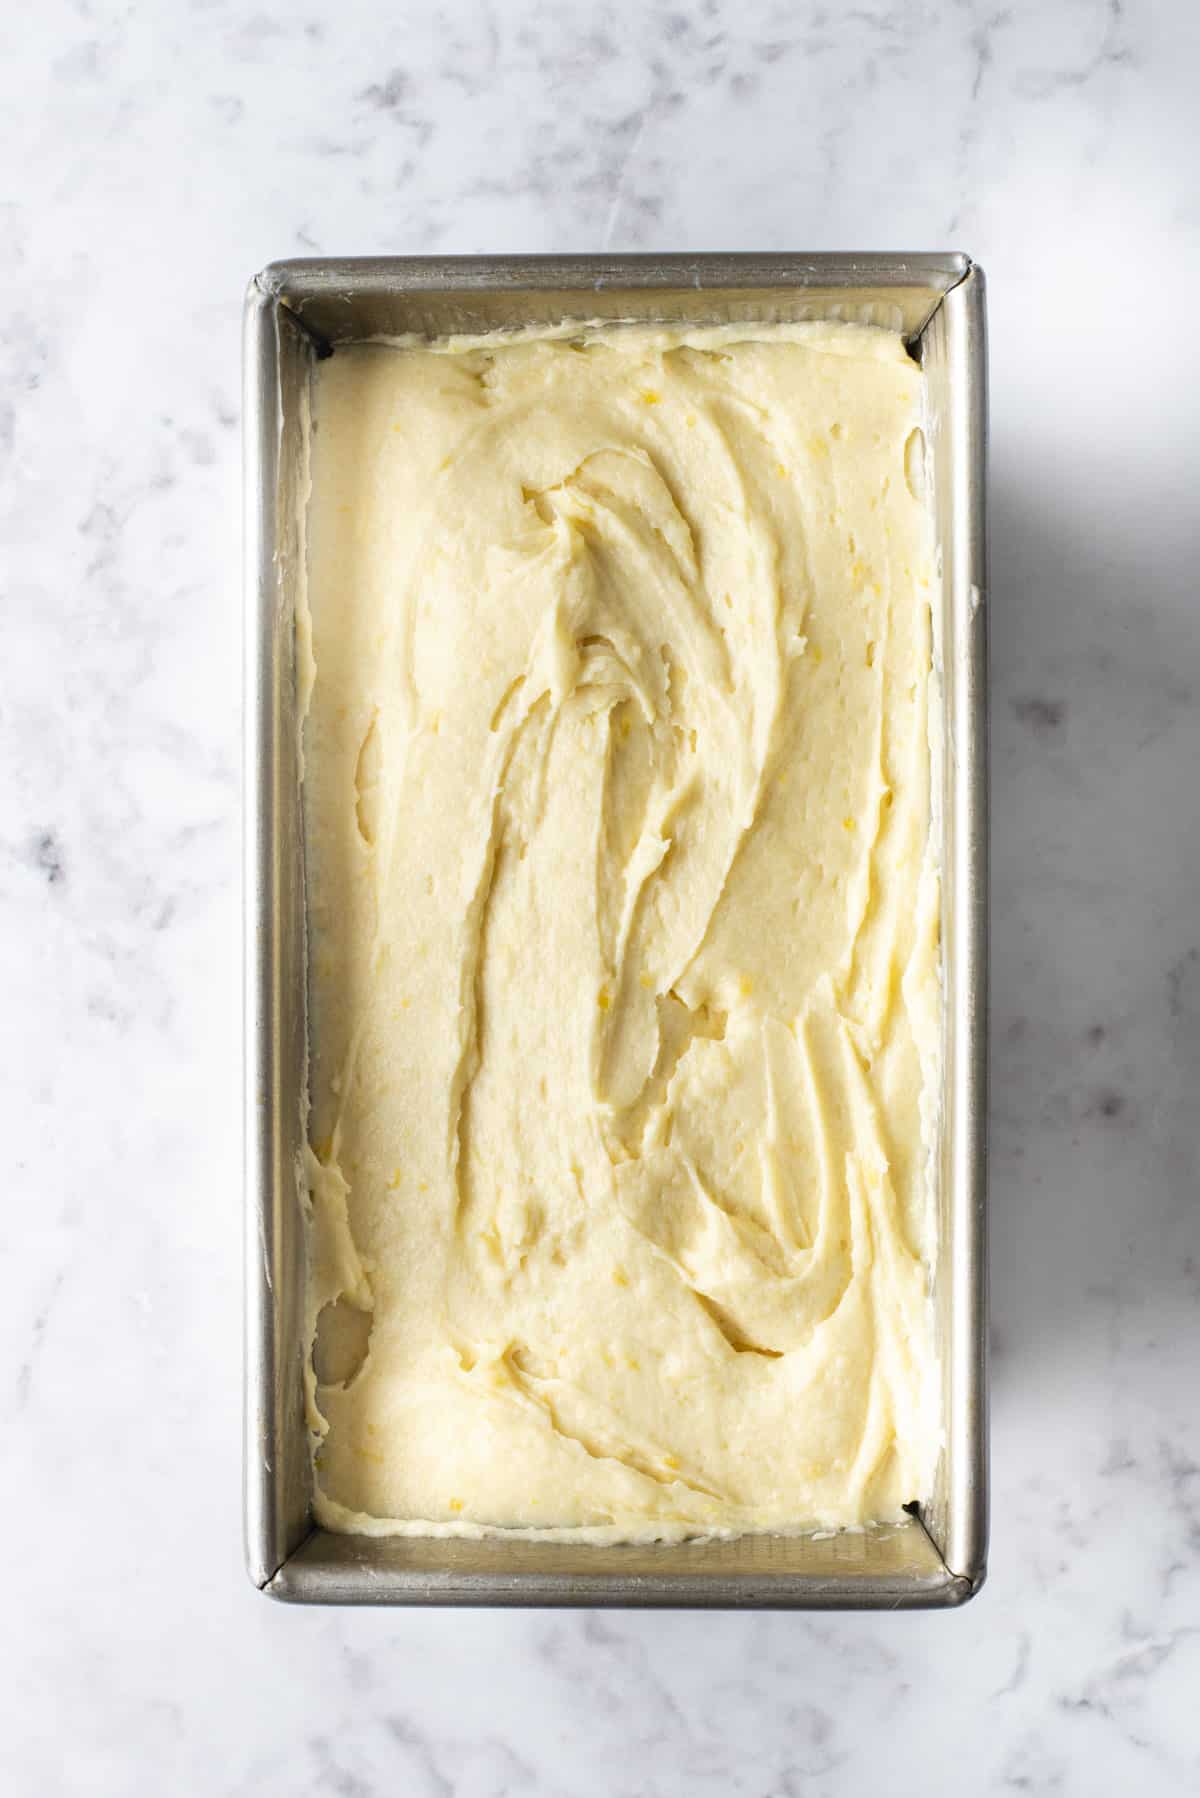 lemon pound cake batter in a loaf pan on a countertop